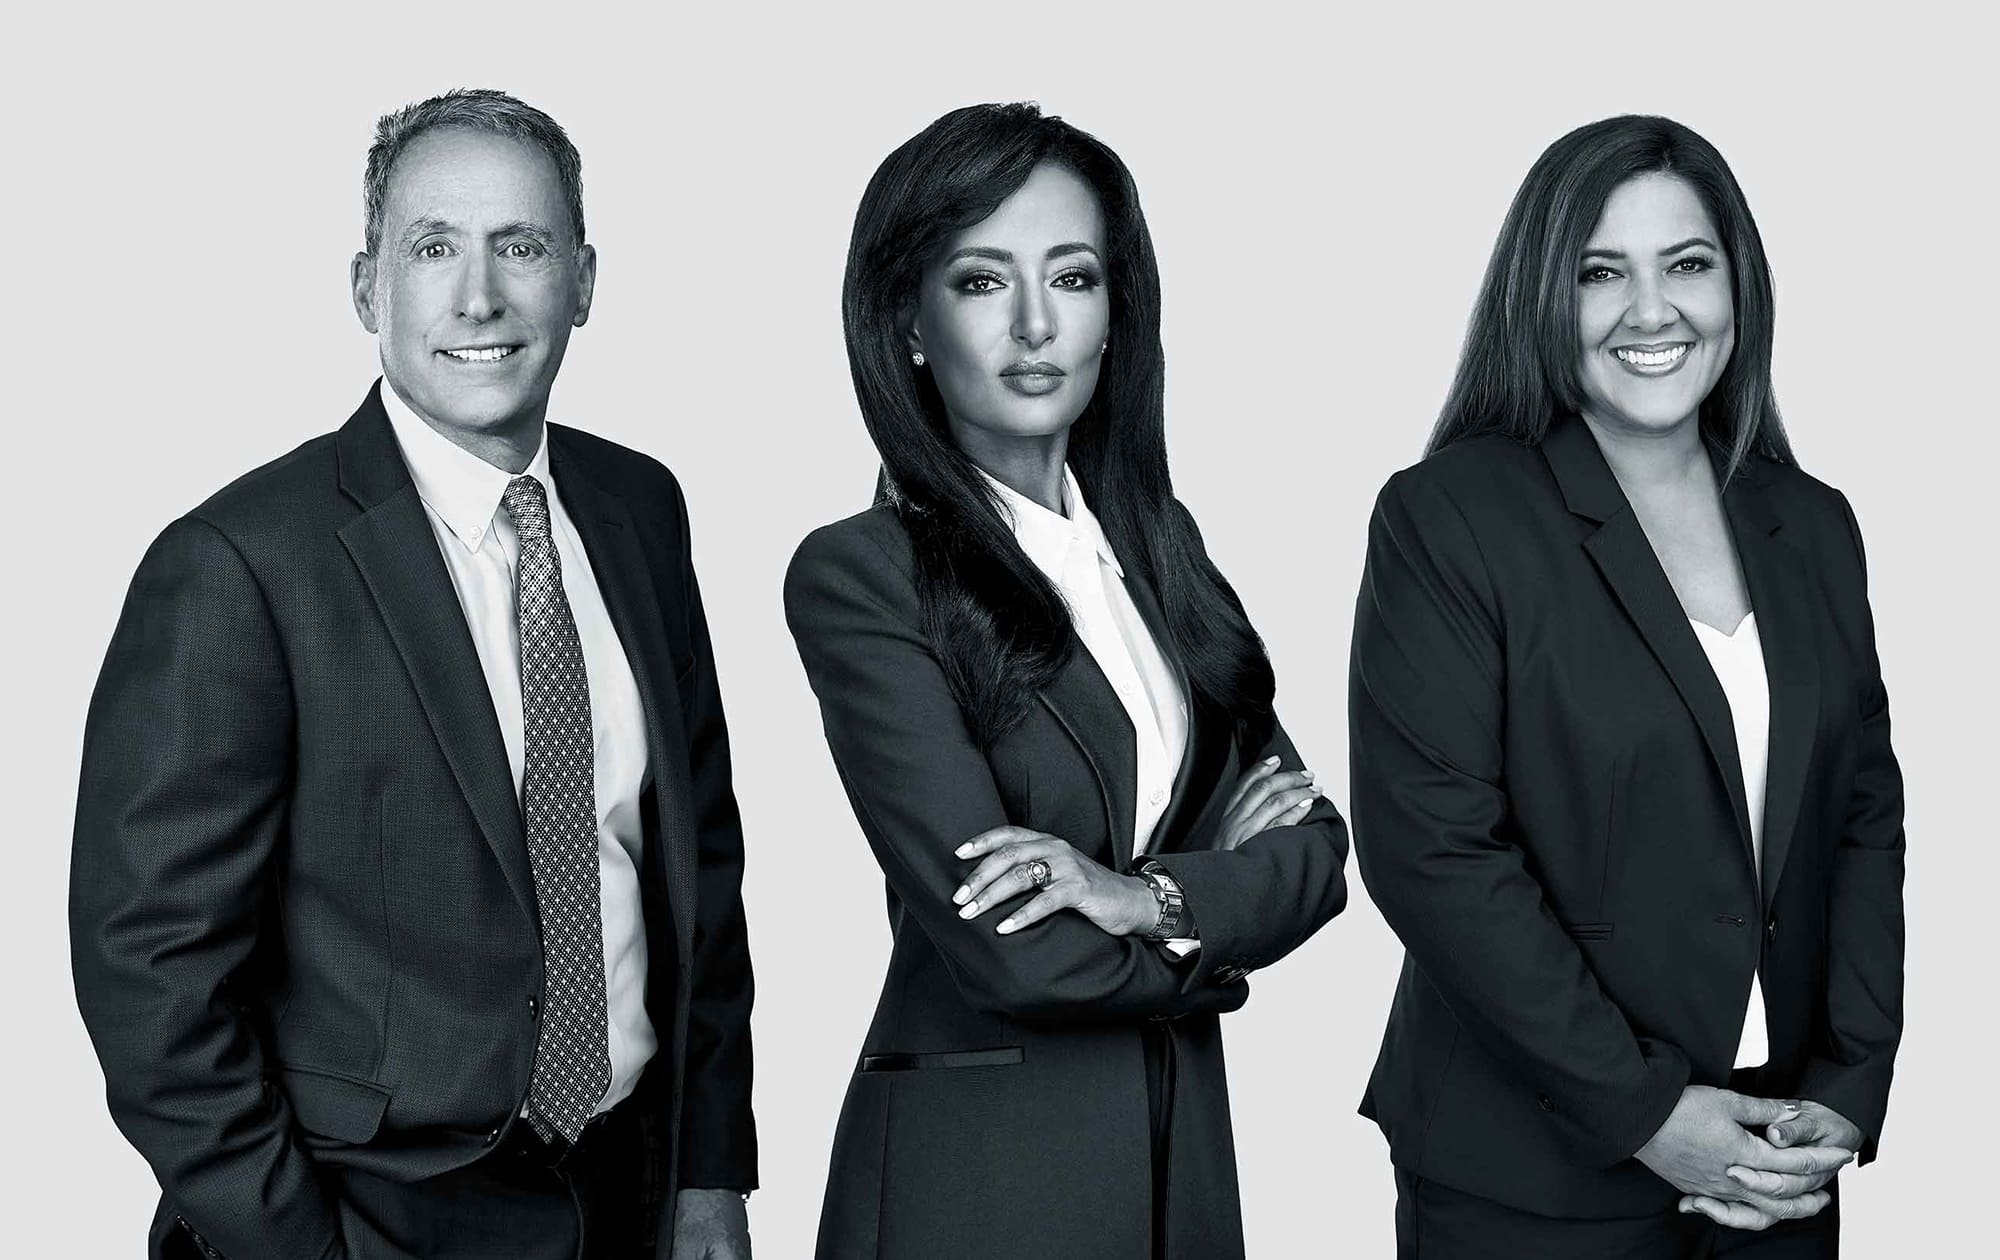 Nurse defense attorneys Robert K. Weinberg, Tsion Chudnovsky and Suzanne Crouts represent California nurses throughout the entire state of California.